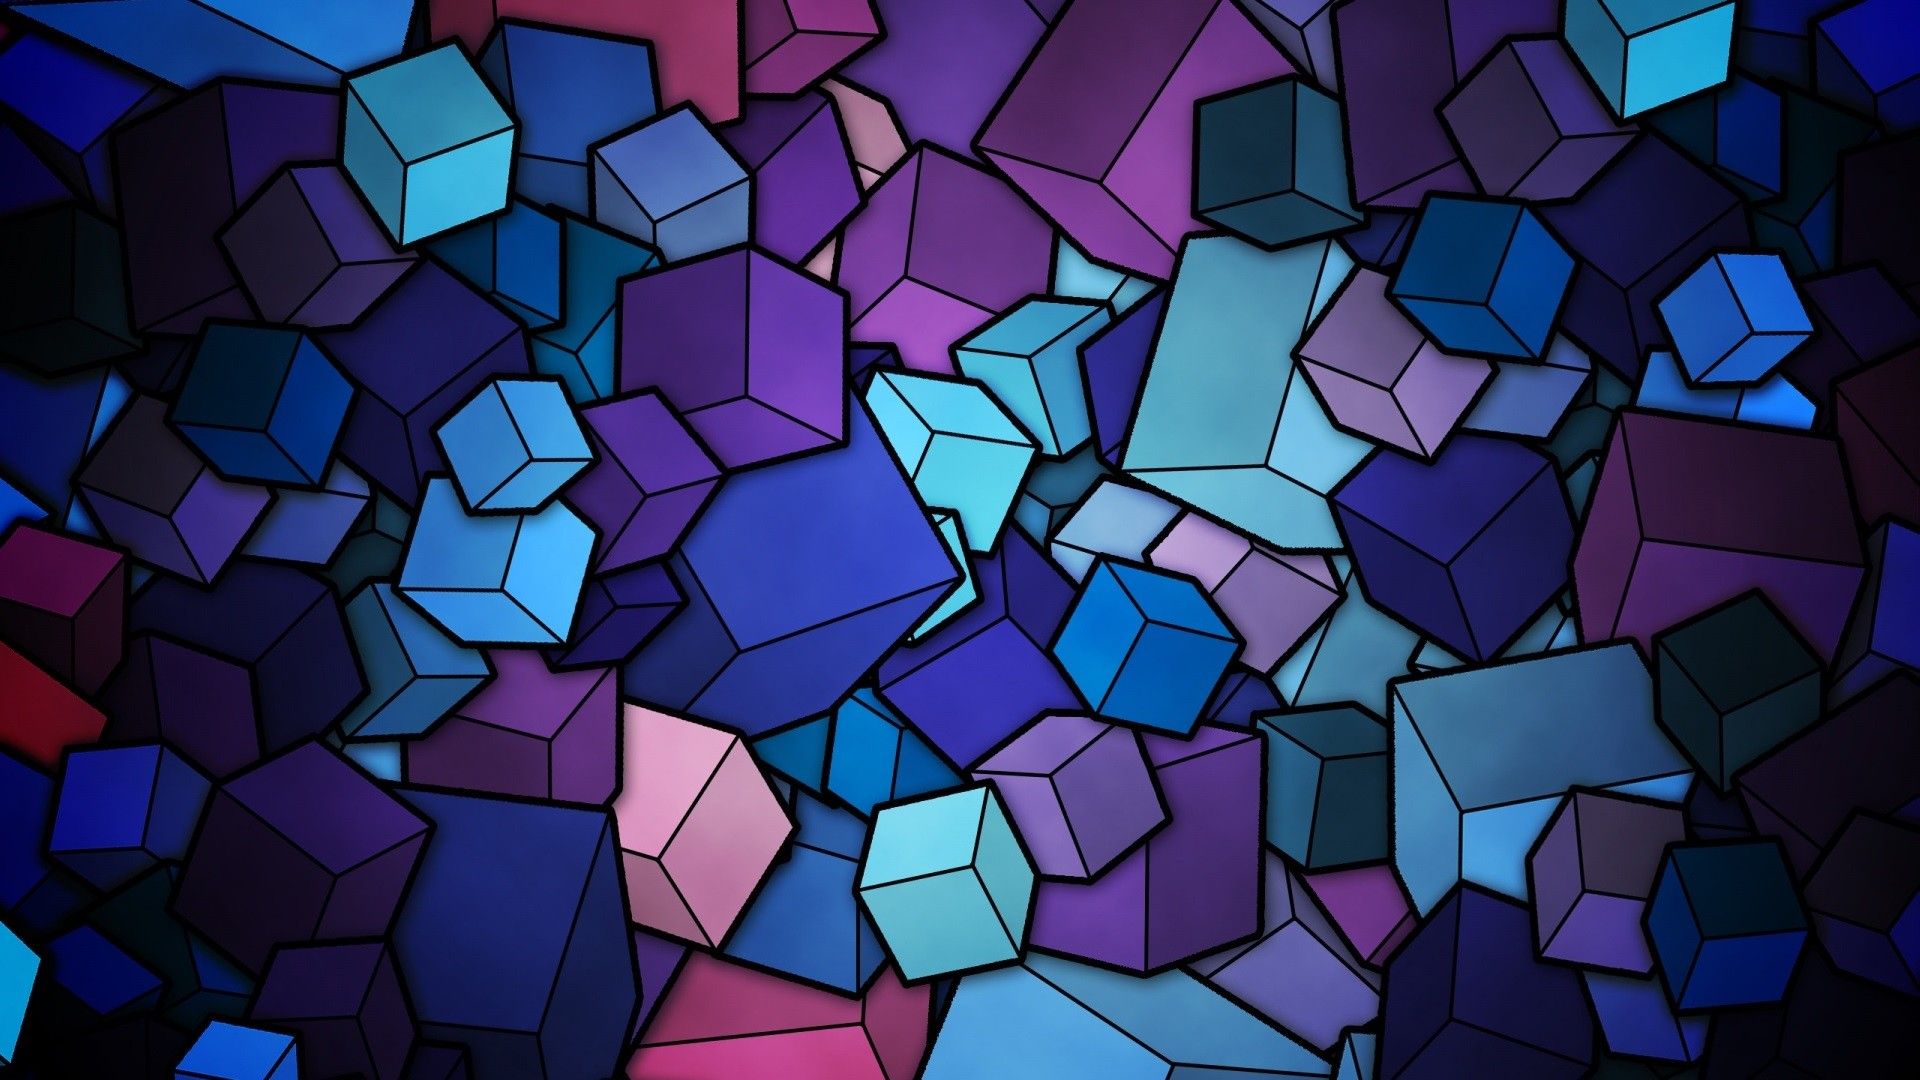 Stained Glass Geometry Cubes HD Wallpaper FullHDwpp